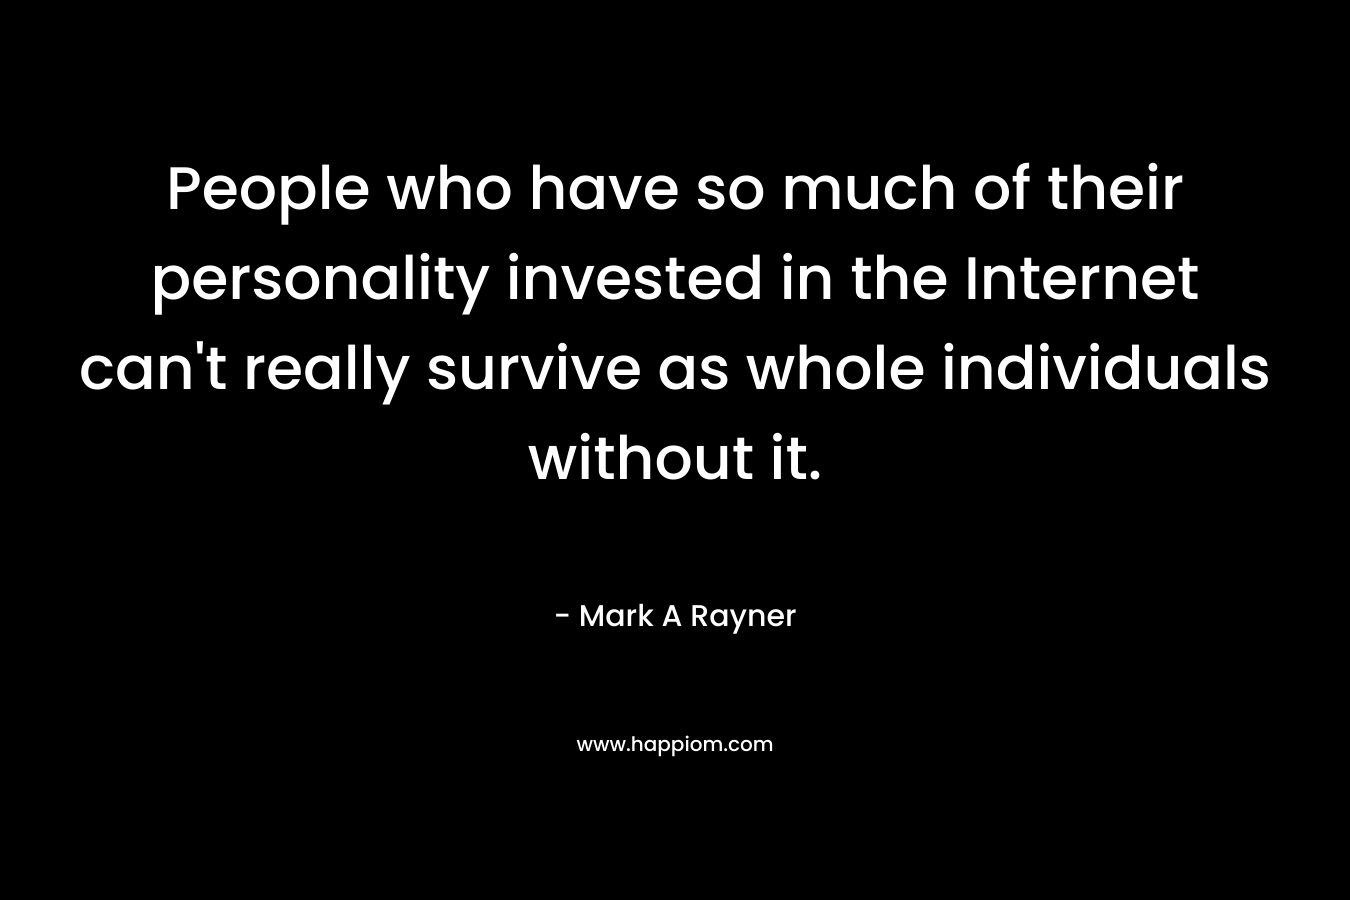 People who have so much of their personality invested in the Internet can’t really survive as whole individuals without it. – Mark A Rayner